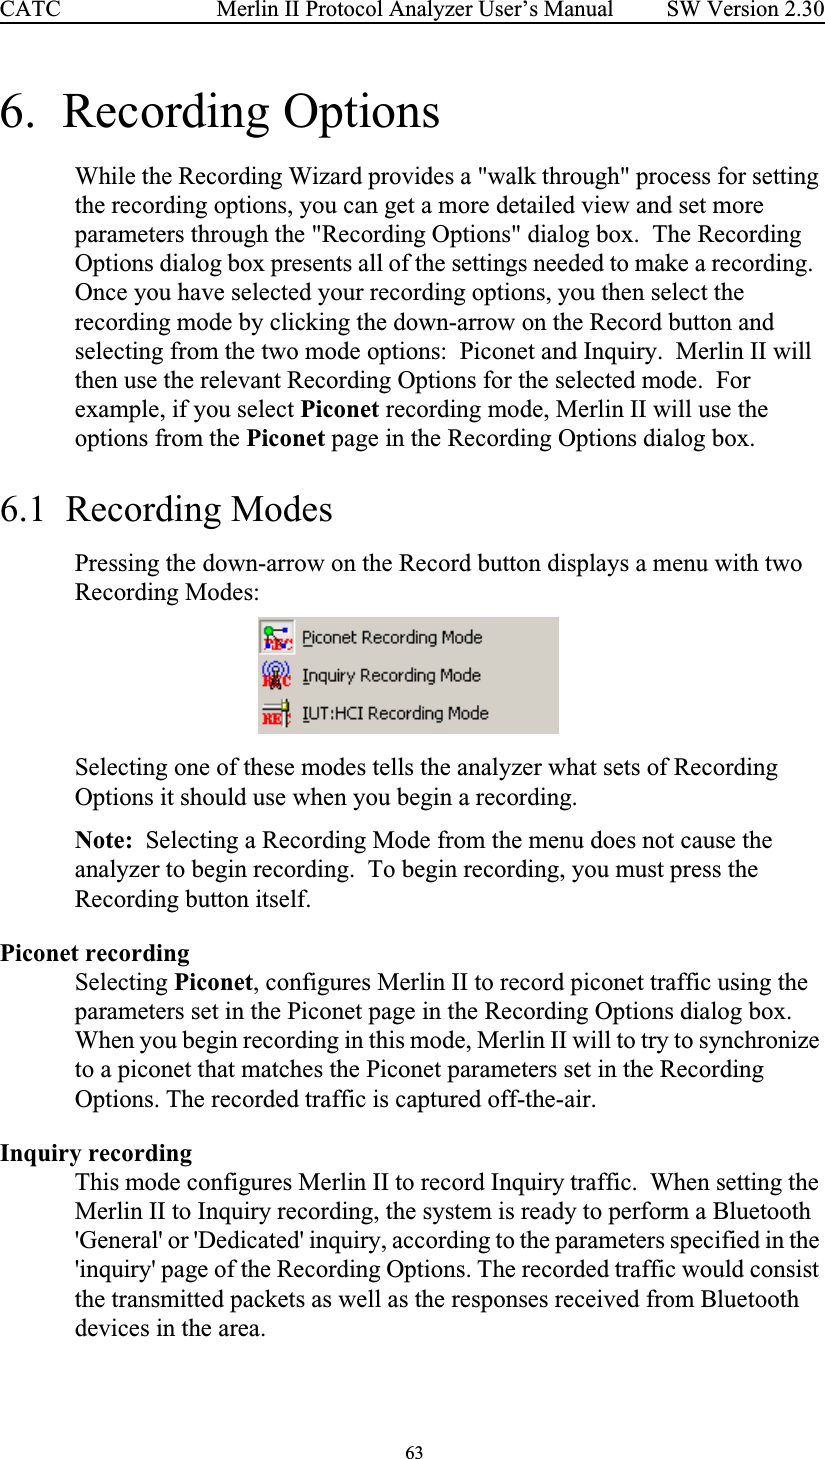  63 Merlin II Protocol Analyzer User’s ManualCATC SW Version 2.306.  Recording OptionsWhile the Recording Wizard provides a &quot;walk through&quot; process for setting the recording options, you can get a more detailed view and set more parameters through the &quot;Recording Options&quot; dialog box.  The Recording Options dialog box presents all of the settings needed to make a recording.  Once you have selected your recording options, you then select the recording mode by clicking the down-arrow on the Record button and selecting from the two mode options:  Piconet and Inquiry.  Merlin II will then use the relevant Recording Options for the selected mode.  For example, if you select Piconet recording mode, Merlin II will use the options from the Piconet page in the Recording Options dialog box.6.1  Recording ModesPressing the down-arrow on the Record button displays a menu with two Recording Modes:Selecting one of these modes tells the analyzer what sets of Recording Options it should use when you begin a recording.Note:  Selecting a Recording Mode from the menu does not cause the analyzer to begin recording.  To begin recording, you must press the Recording button itself. Piconet recording Selecting Piconet, configures Merlin II to record piconet traffic using the parameters set in the Piconet page in the Recording Options dialog box.  When you begin recording in this mode, Merlin II will to try to synchronize to a piconet that matches the Piconet parameters set in the Recording Options. The recorded traffic is captured off-the-air. Inquiry recordingThis mode configures Merlin II to record Inquiry traffic.  When setting the Merlin II to Inquiry recording, the system is ready to perform a Bluetooth &apos;General&apos; or &apos;Dedicated&apos; inquiry, according to the parameters specified in the &apos;inquiry&apos; page of the Recording Options. The recorded traffic would consist the transmitted packets as well as the responses received from Bluetooth devices in the area. 